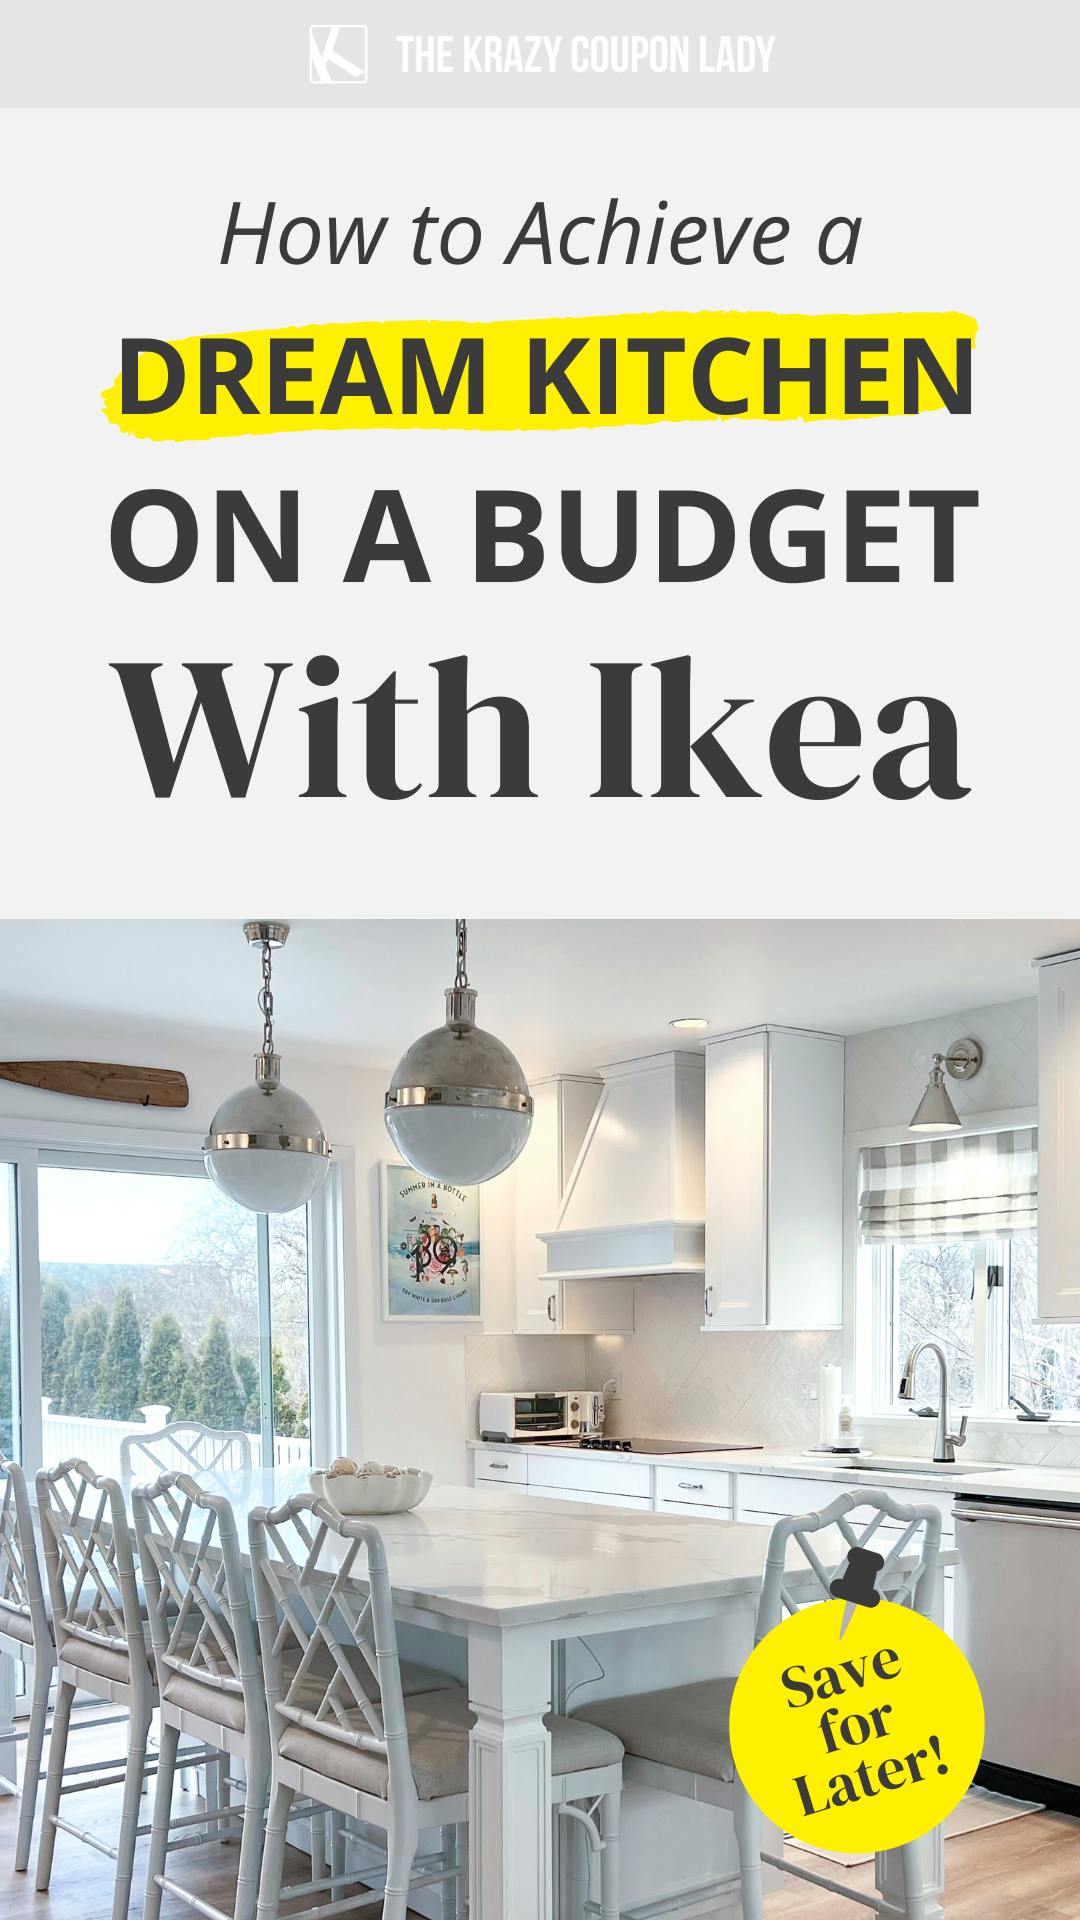 Achieving a Dream Kitchen on a Budget With Ikea